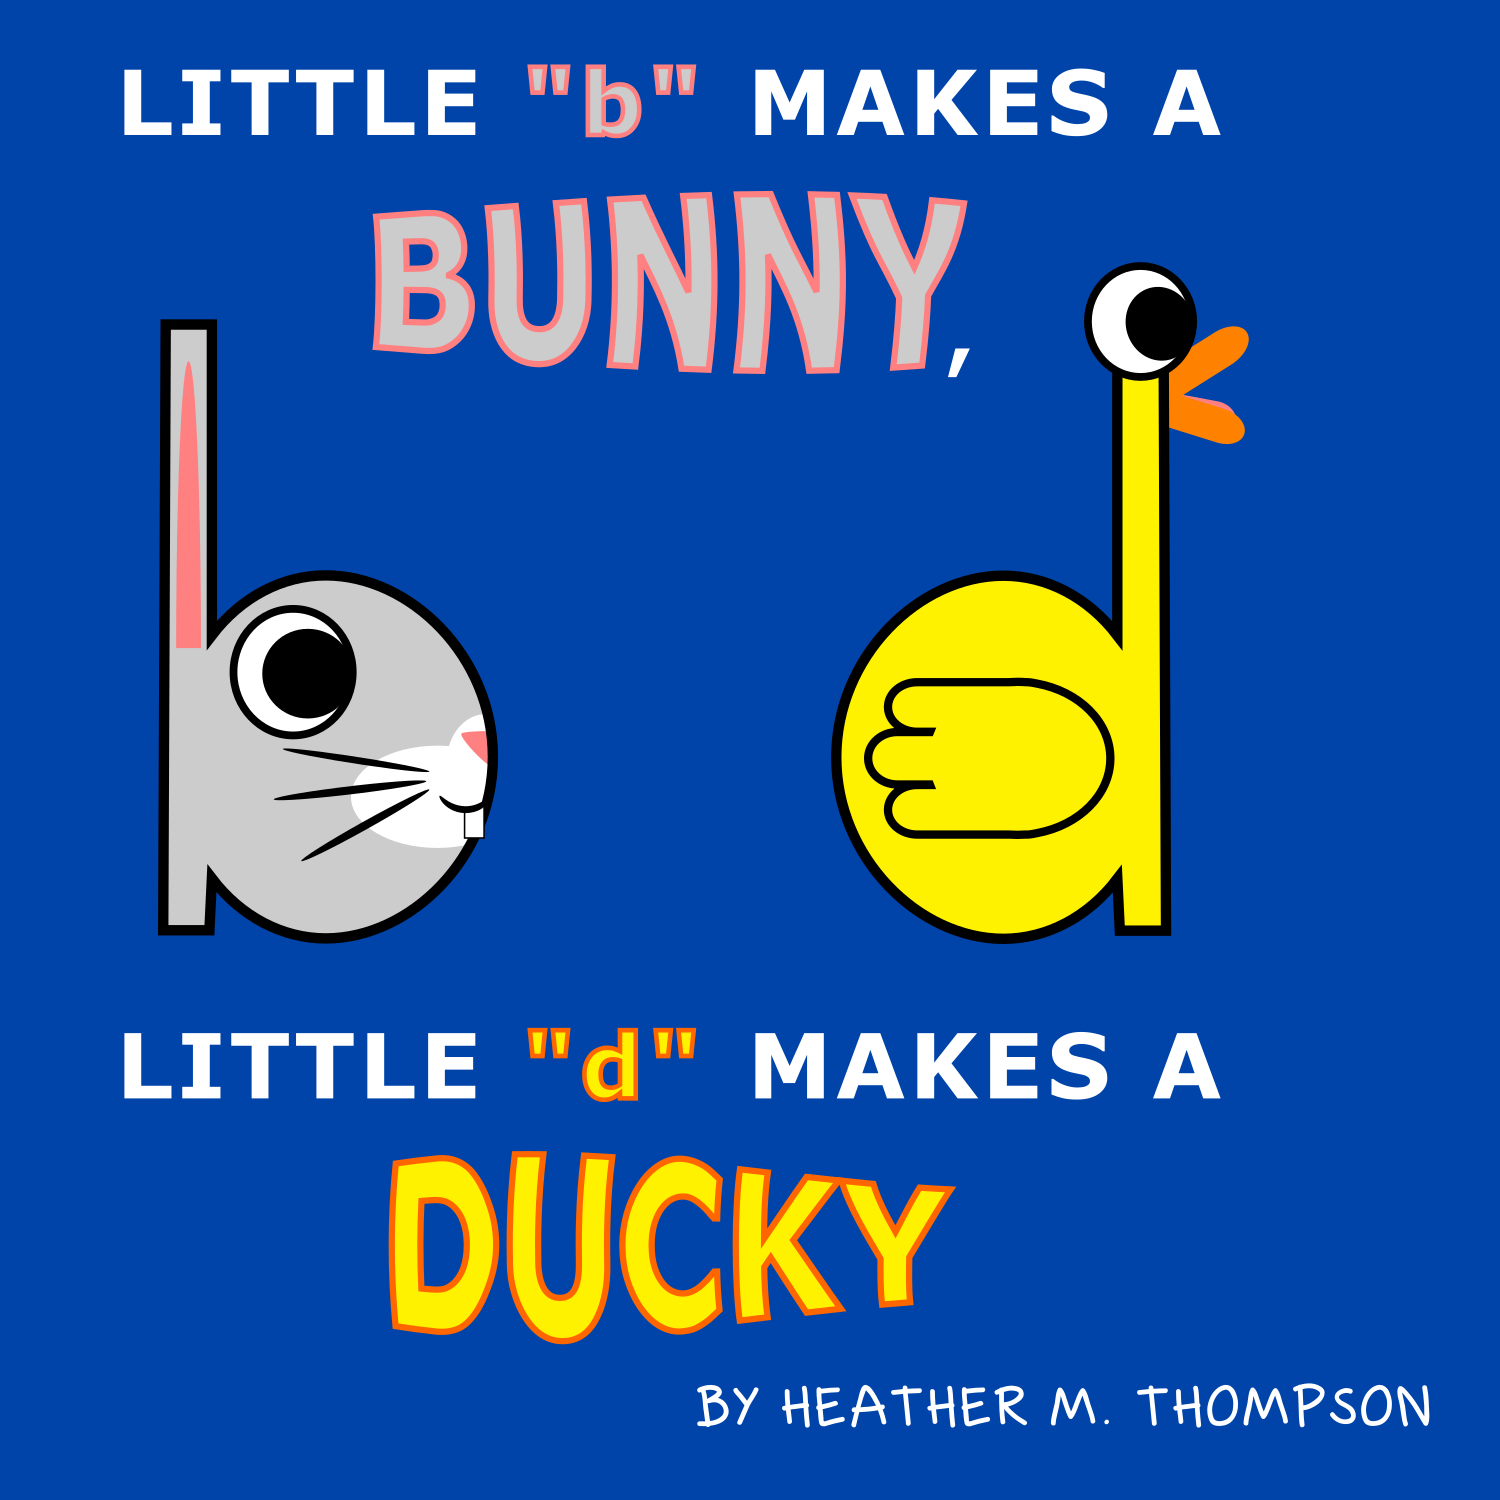 Cover for "Little 'b' Makes a Bunny, Little 'd' Makes a Ducky" courtesy of Heather Thompson. 